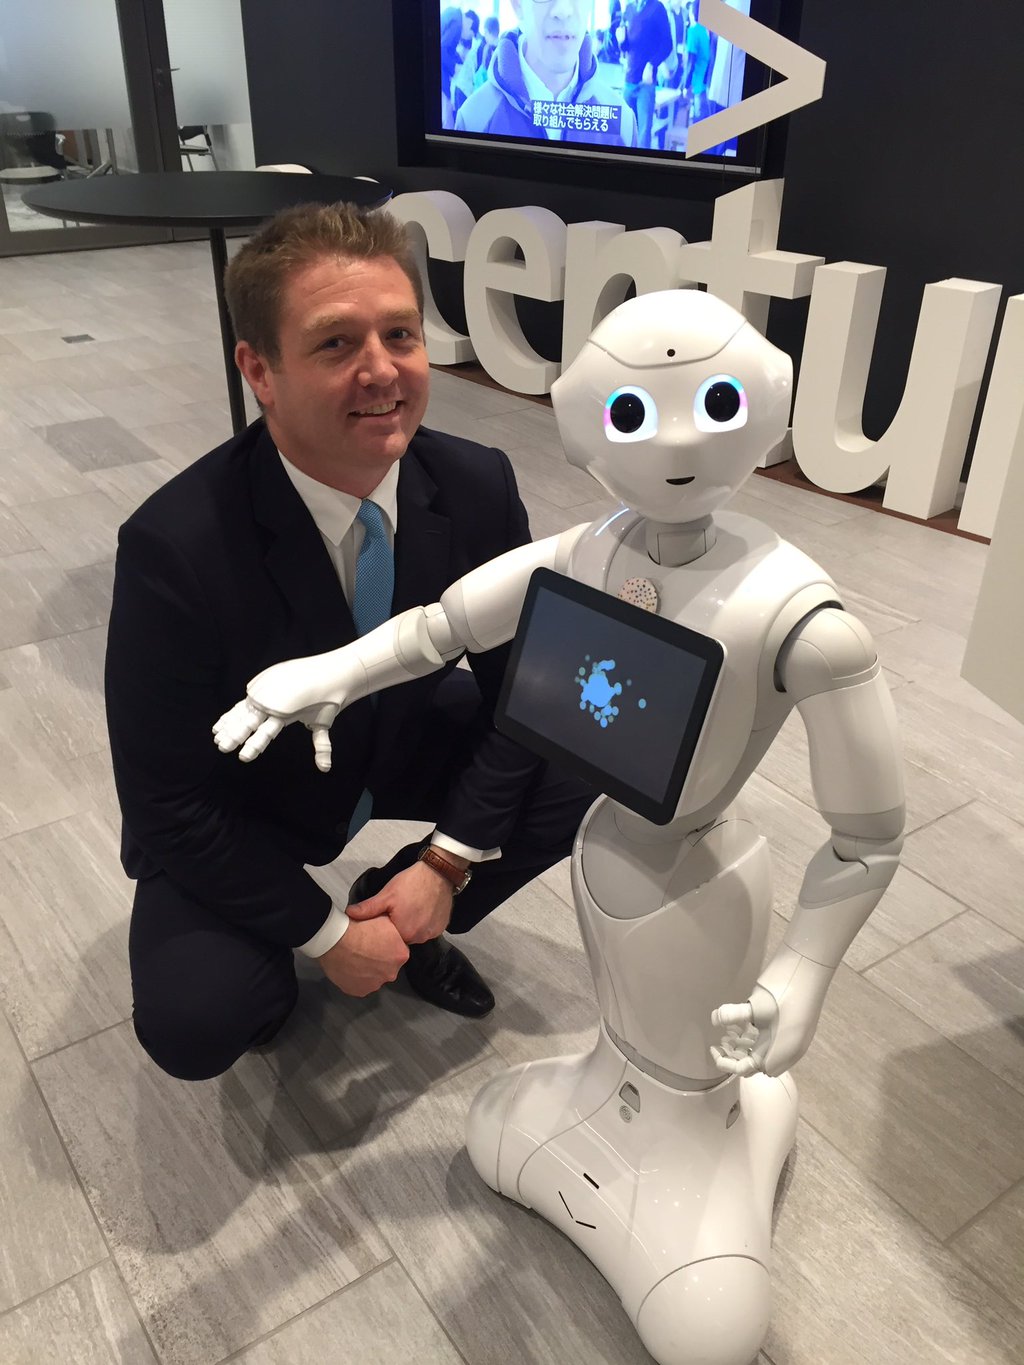 Accenture’s Peter Lacy with Pepper the robot